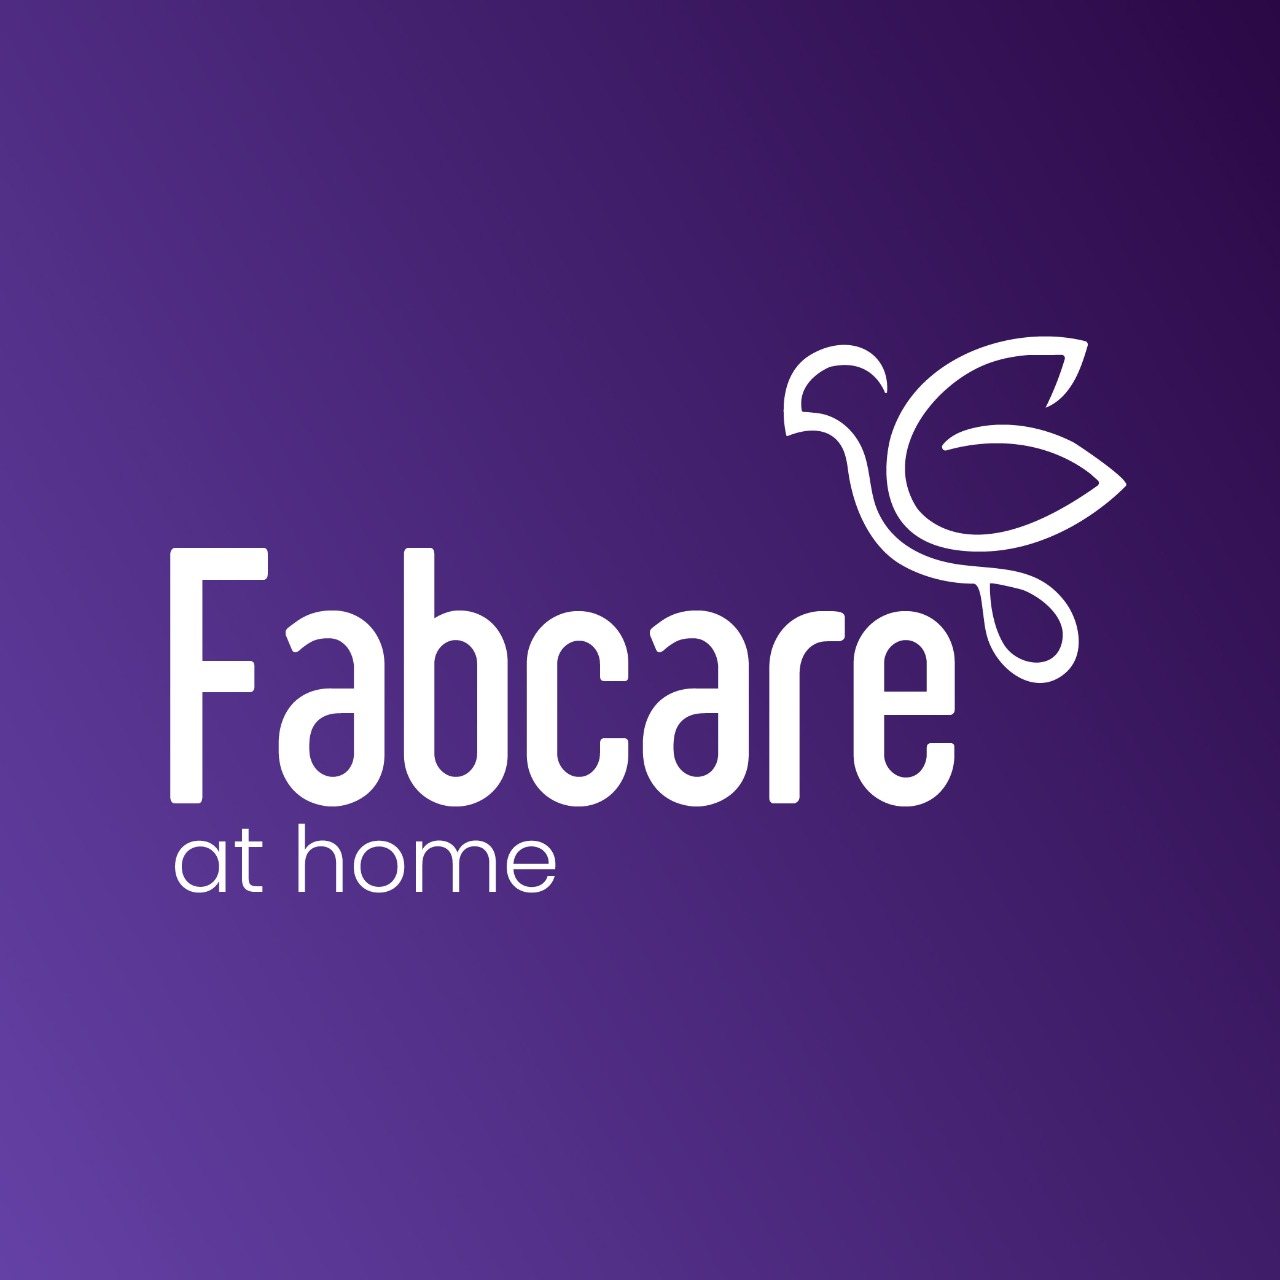 fabcare at home